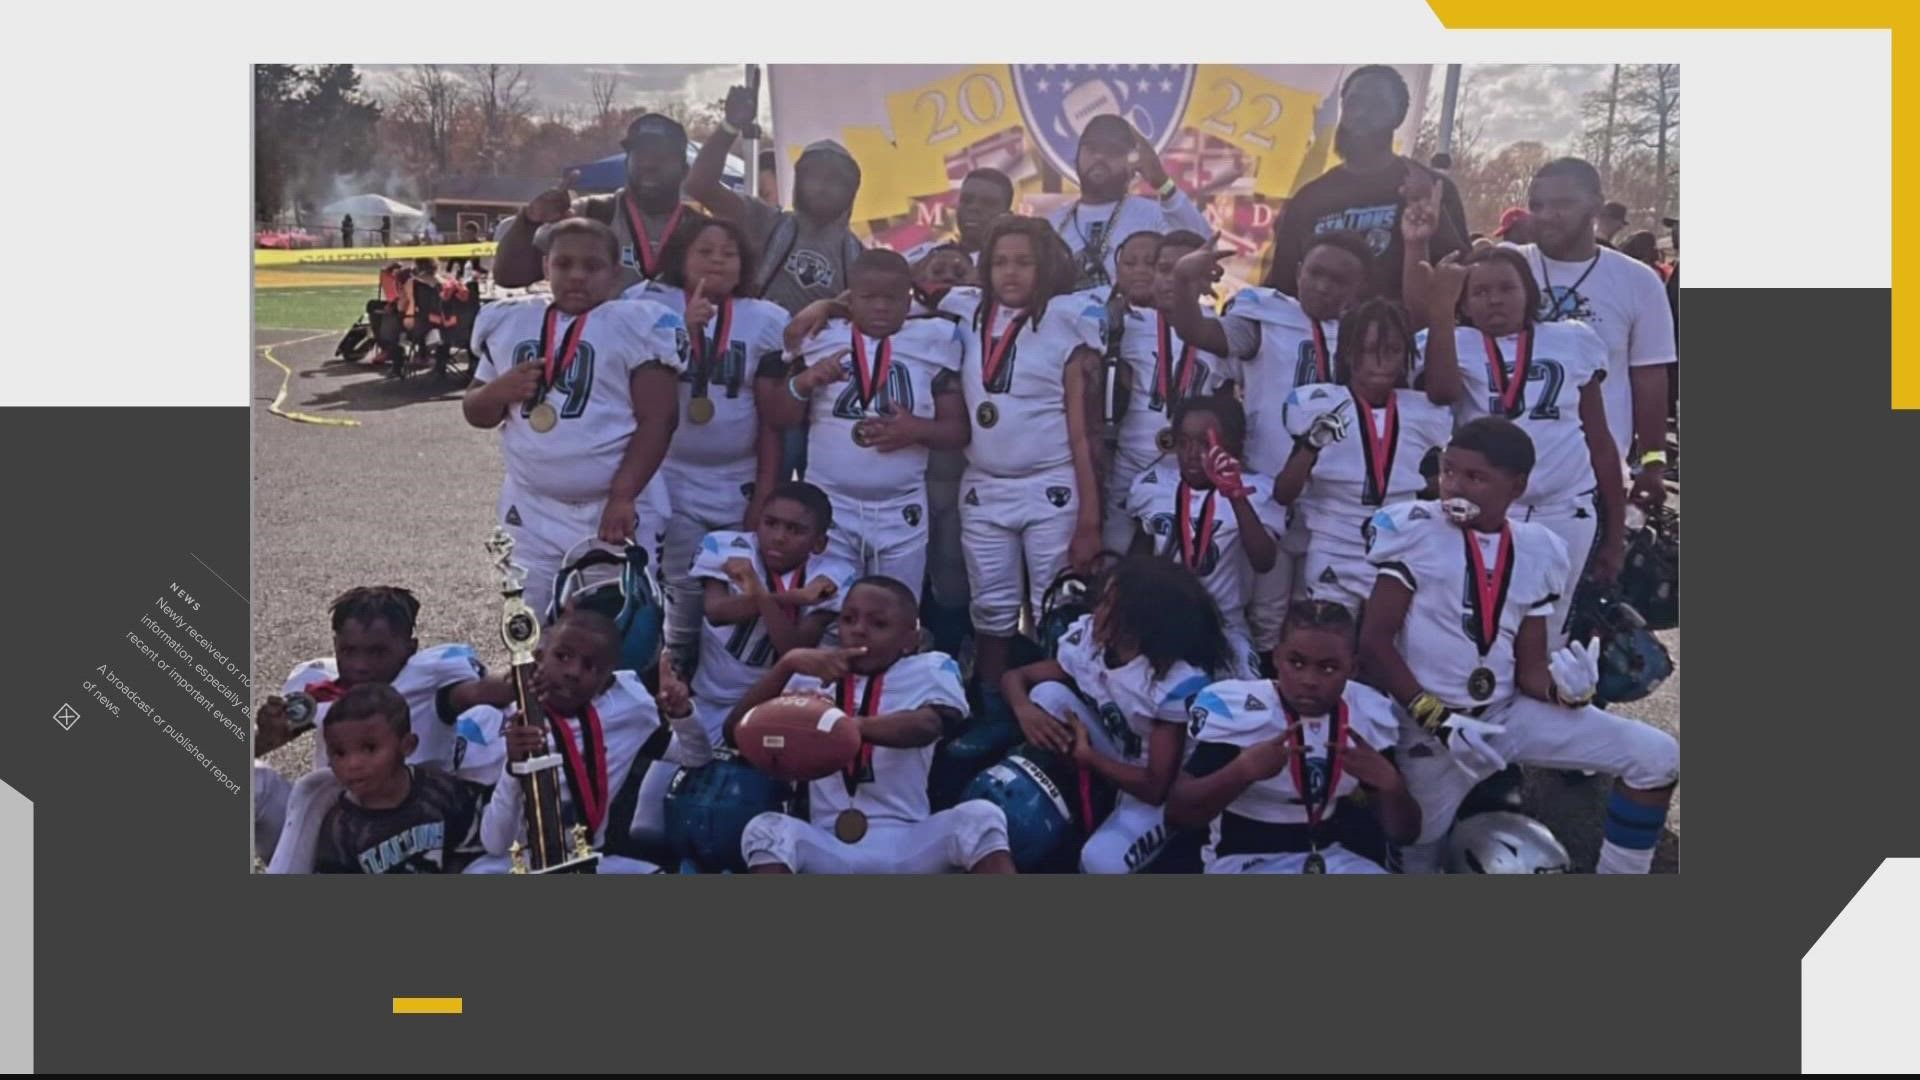 Hear about the amazing Maryland youth football team and the incredible 2022 they have had.